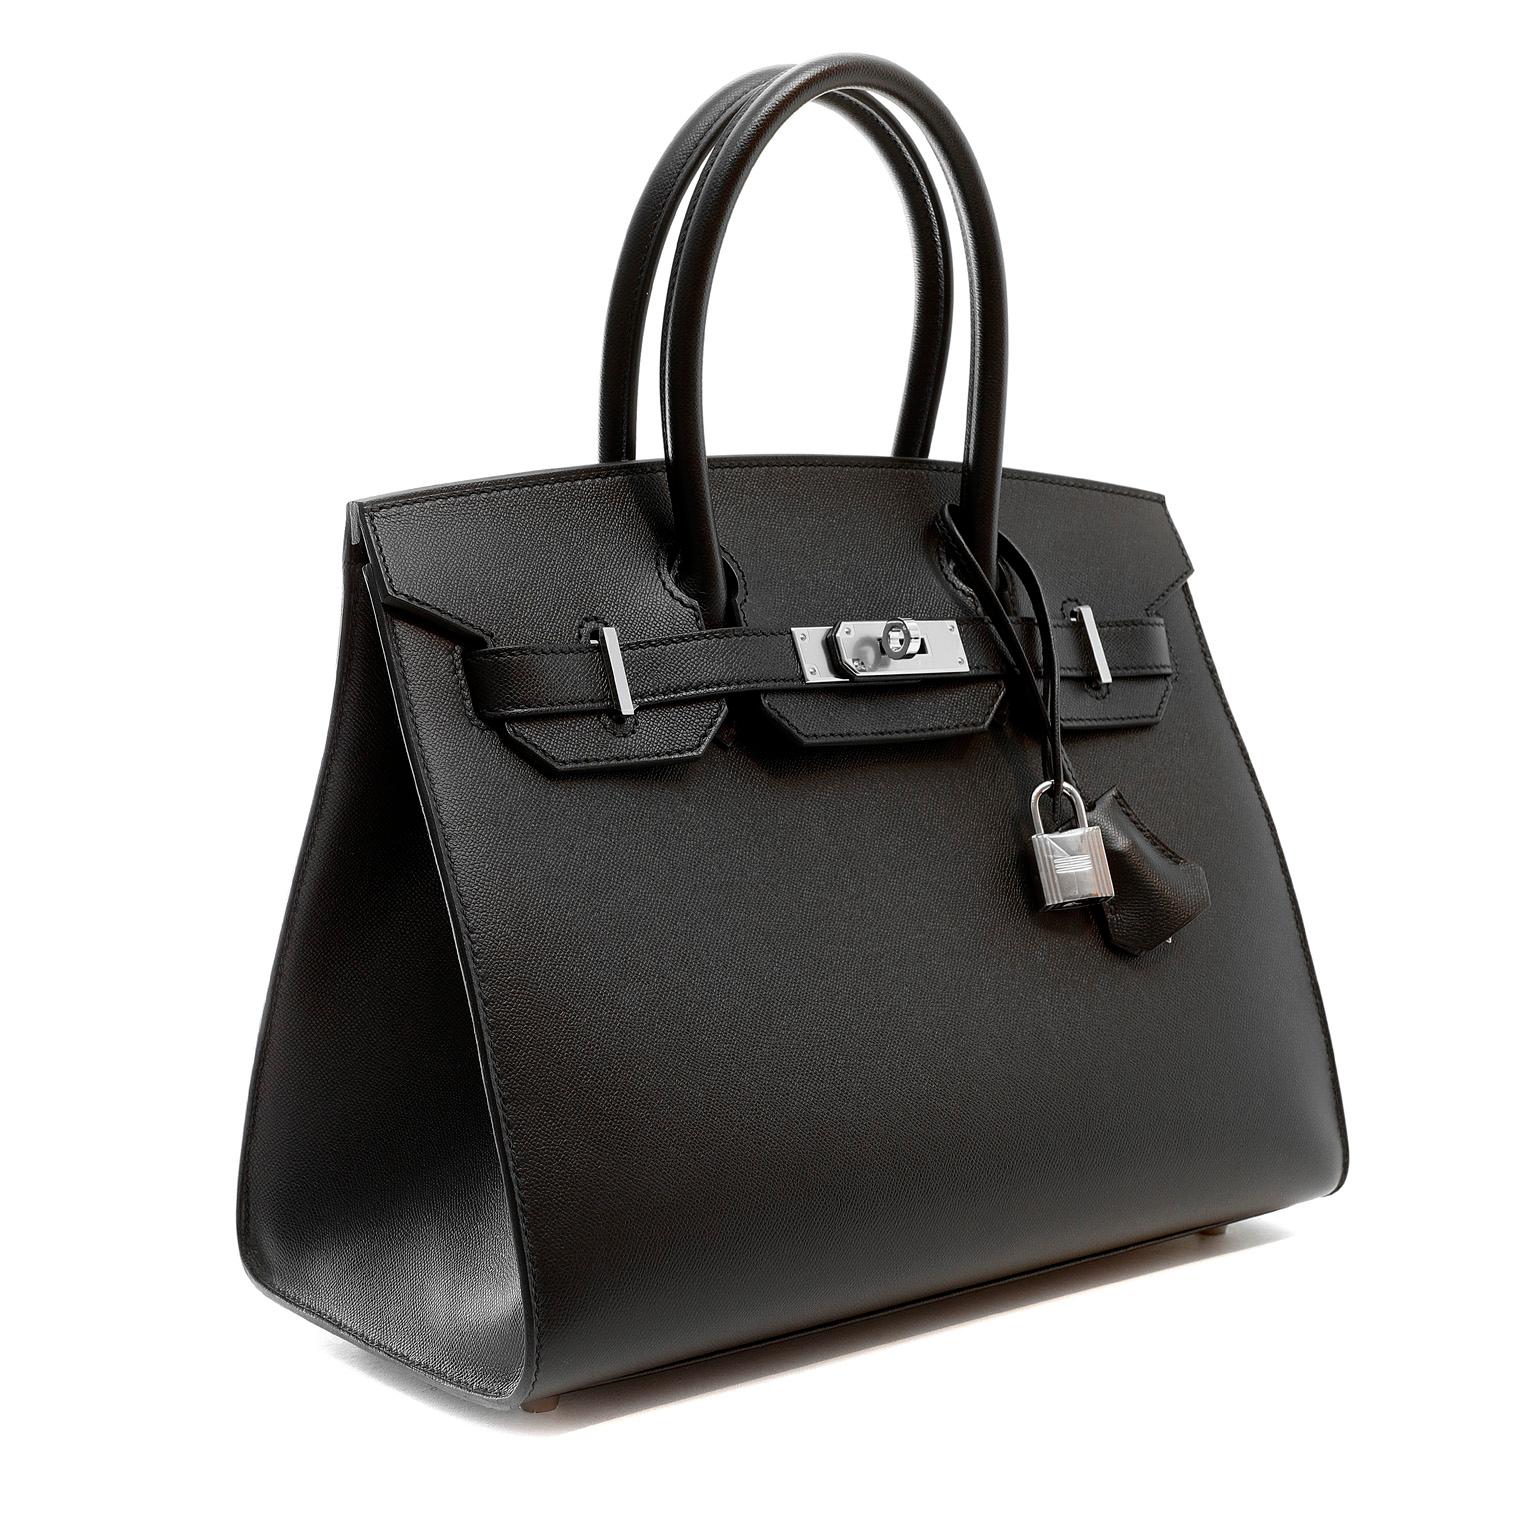 This authentic Hermès Black Veau Madame 30 cm Sellier Birkin is in pristine unworn condition; the protective plastic is still intact on the hardware.    Considered the ultimate luxury item, the Hermès Birkin is stitched by hand. 
Veau Madame leather